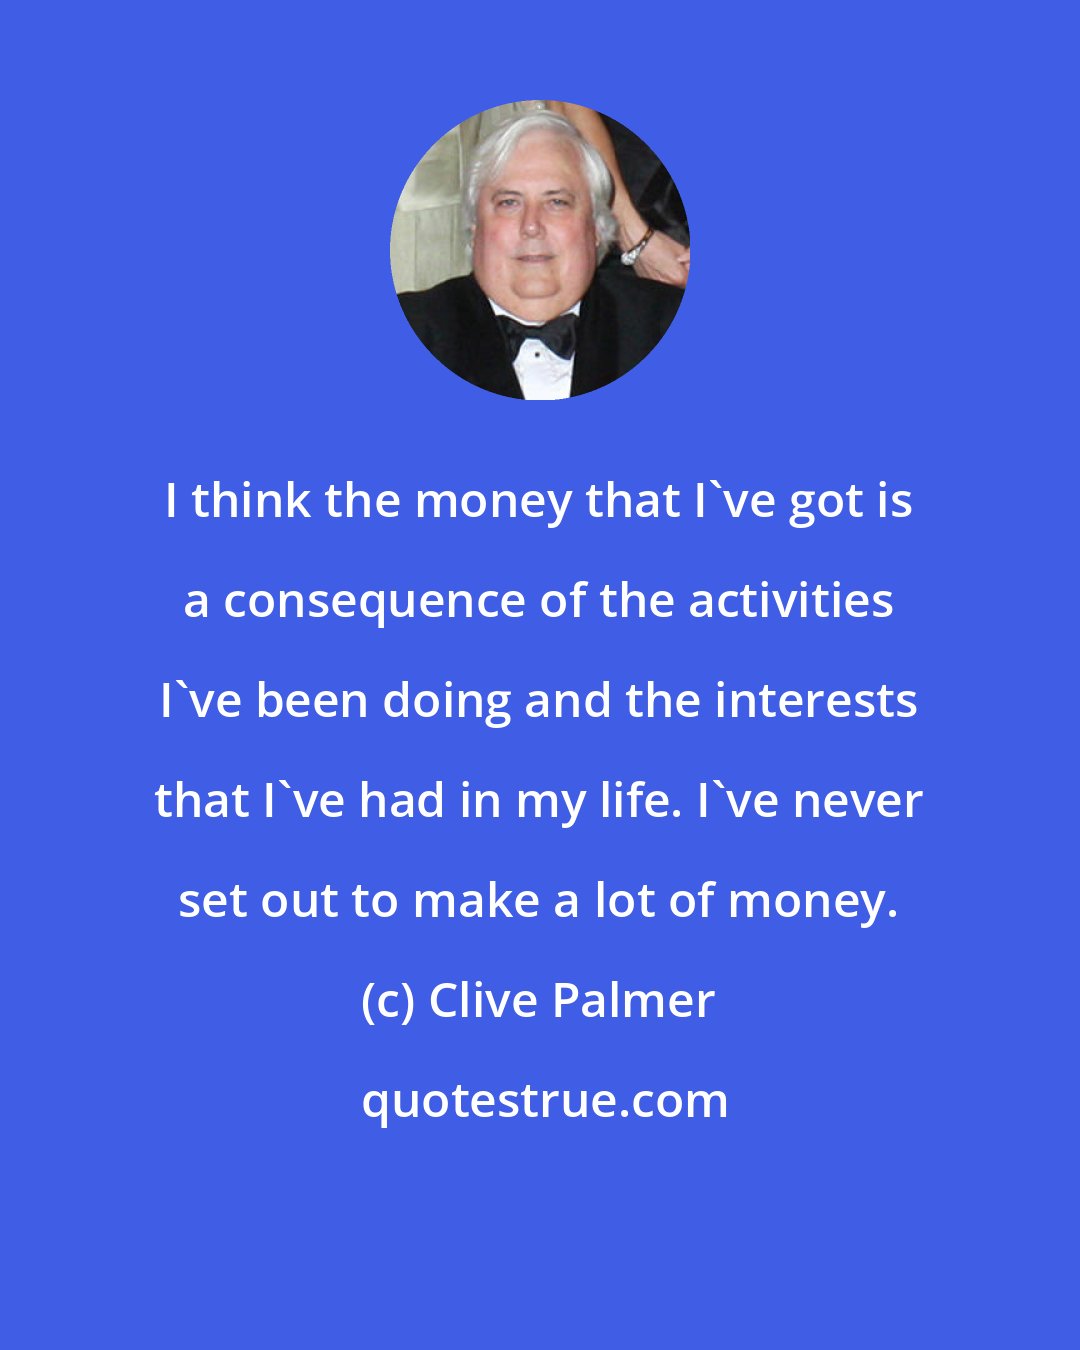 Clive Palmer: I think the money that I've got is a consequence of the activities I've been doing and the interests that I've had in my life. I've never set out to make a lot of money.